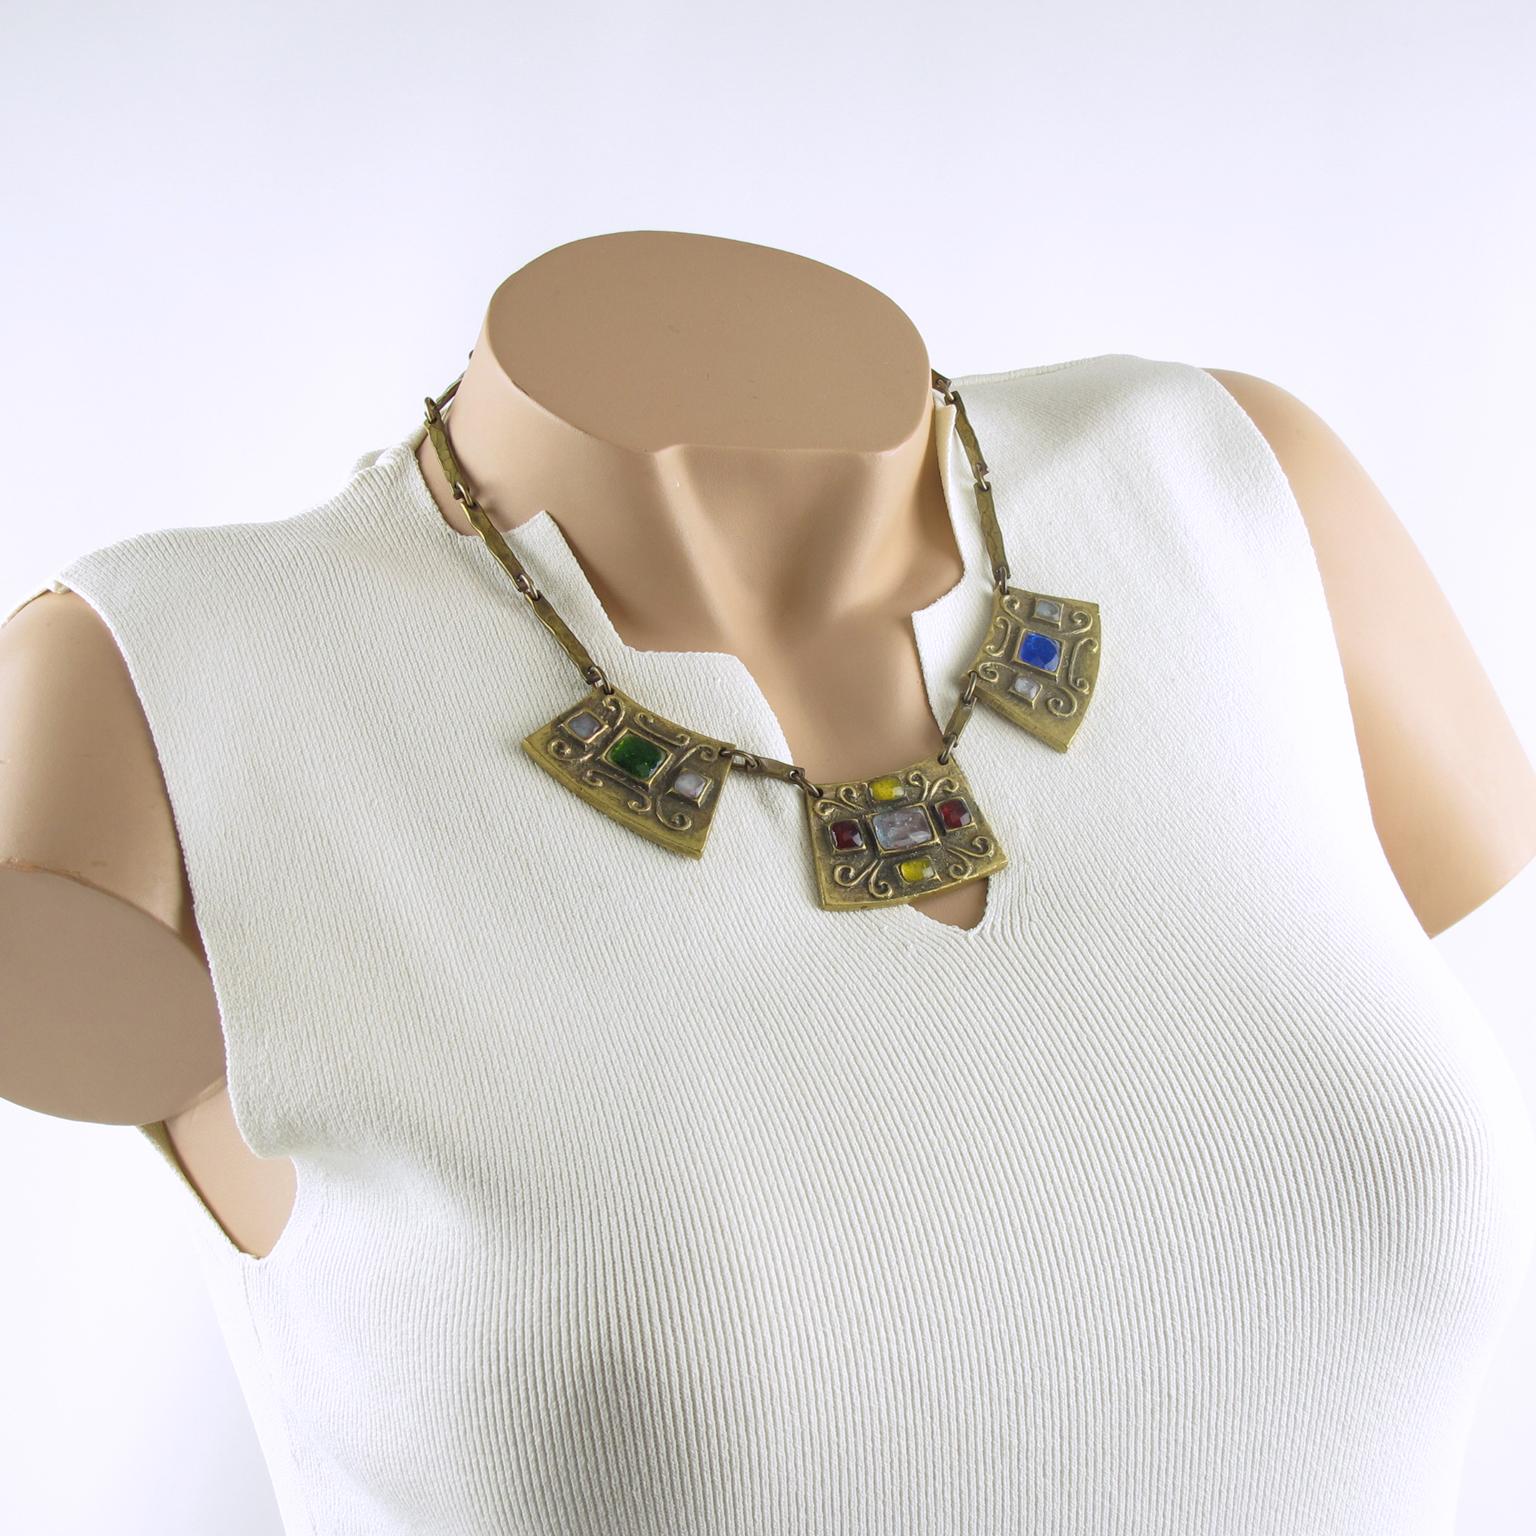 This charming modernist bronze choker necklace boasts a geometric construction with three central medallions on a heavy gilded bronze worked chain. Each geometric bronze medallion is embellished with poured glass cabochons in white opalescent,